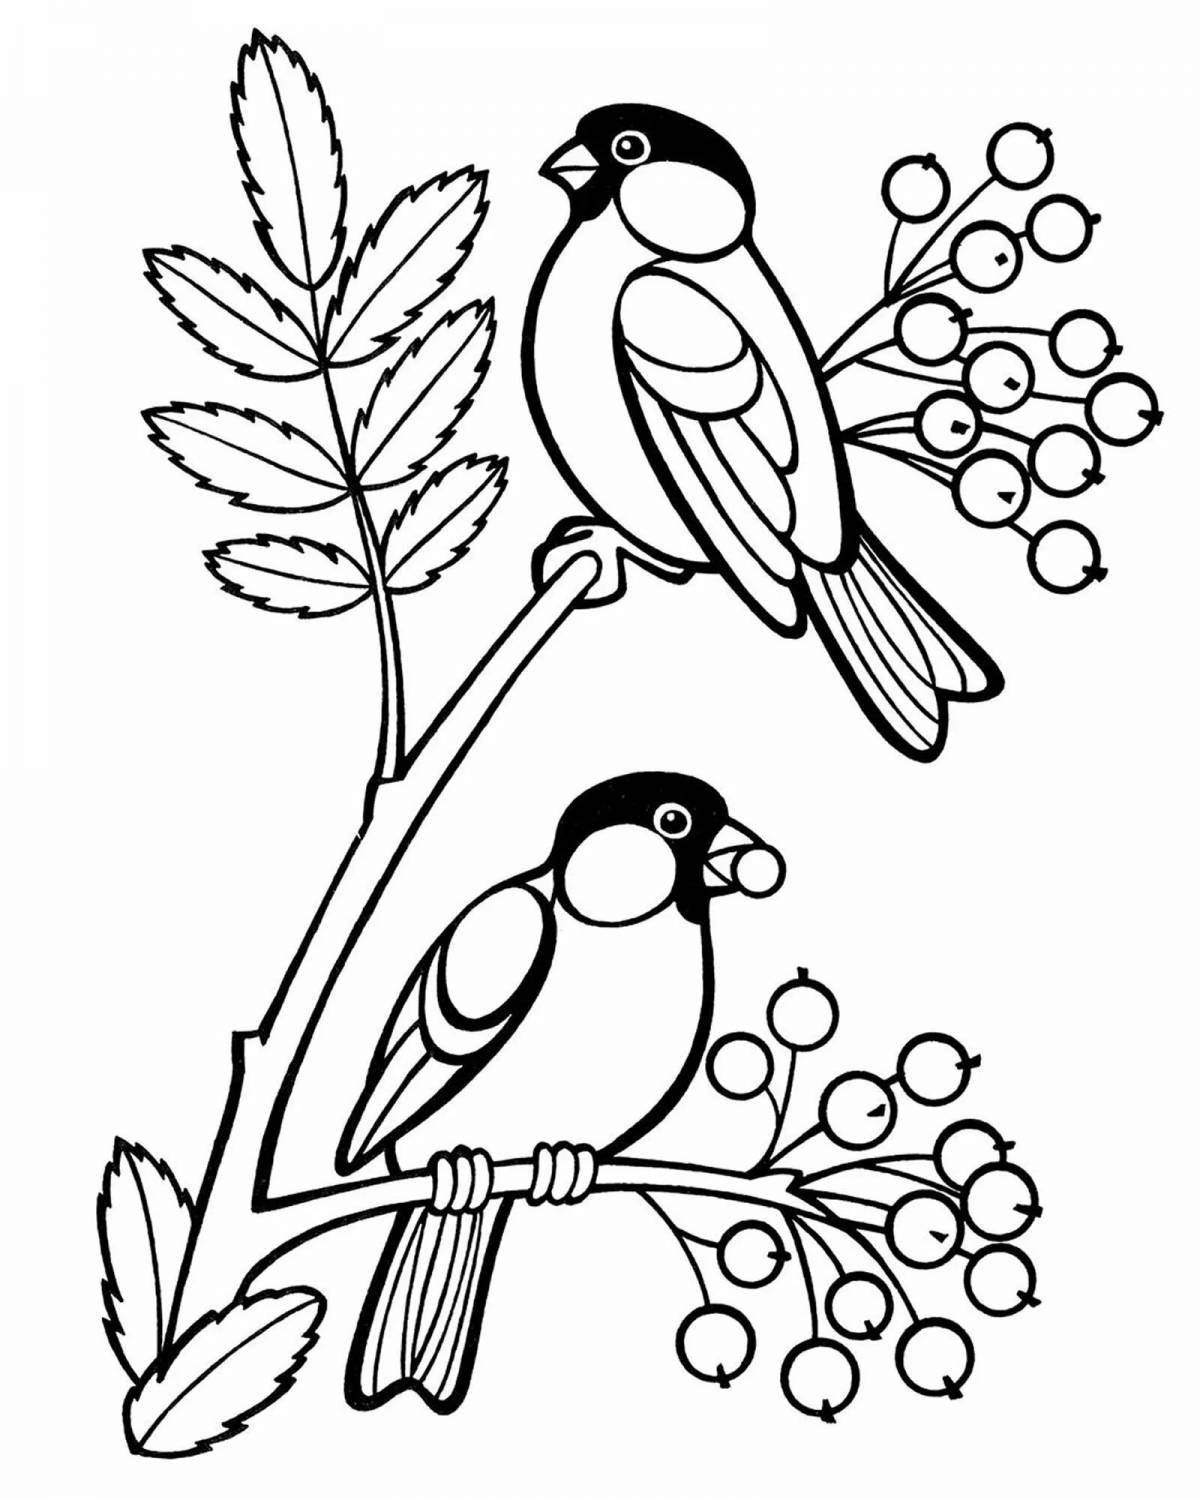 Coloring book amazing bullfinch and titmouse